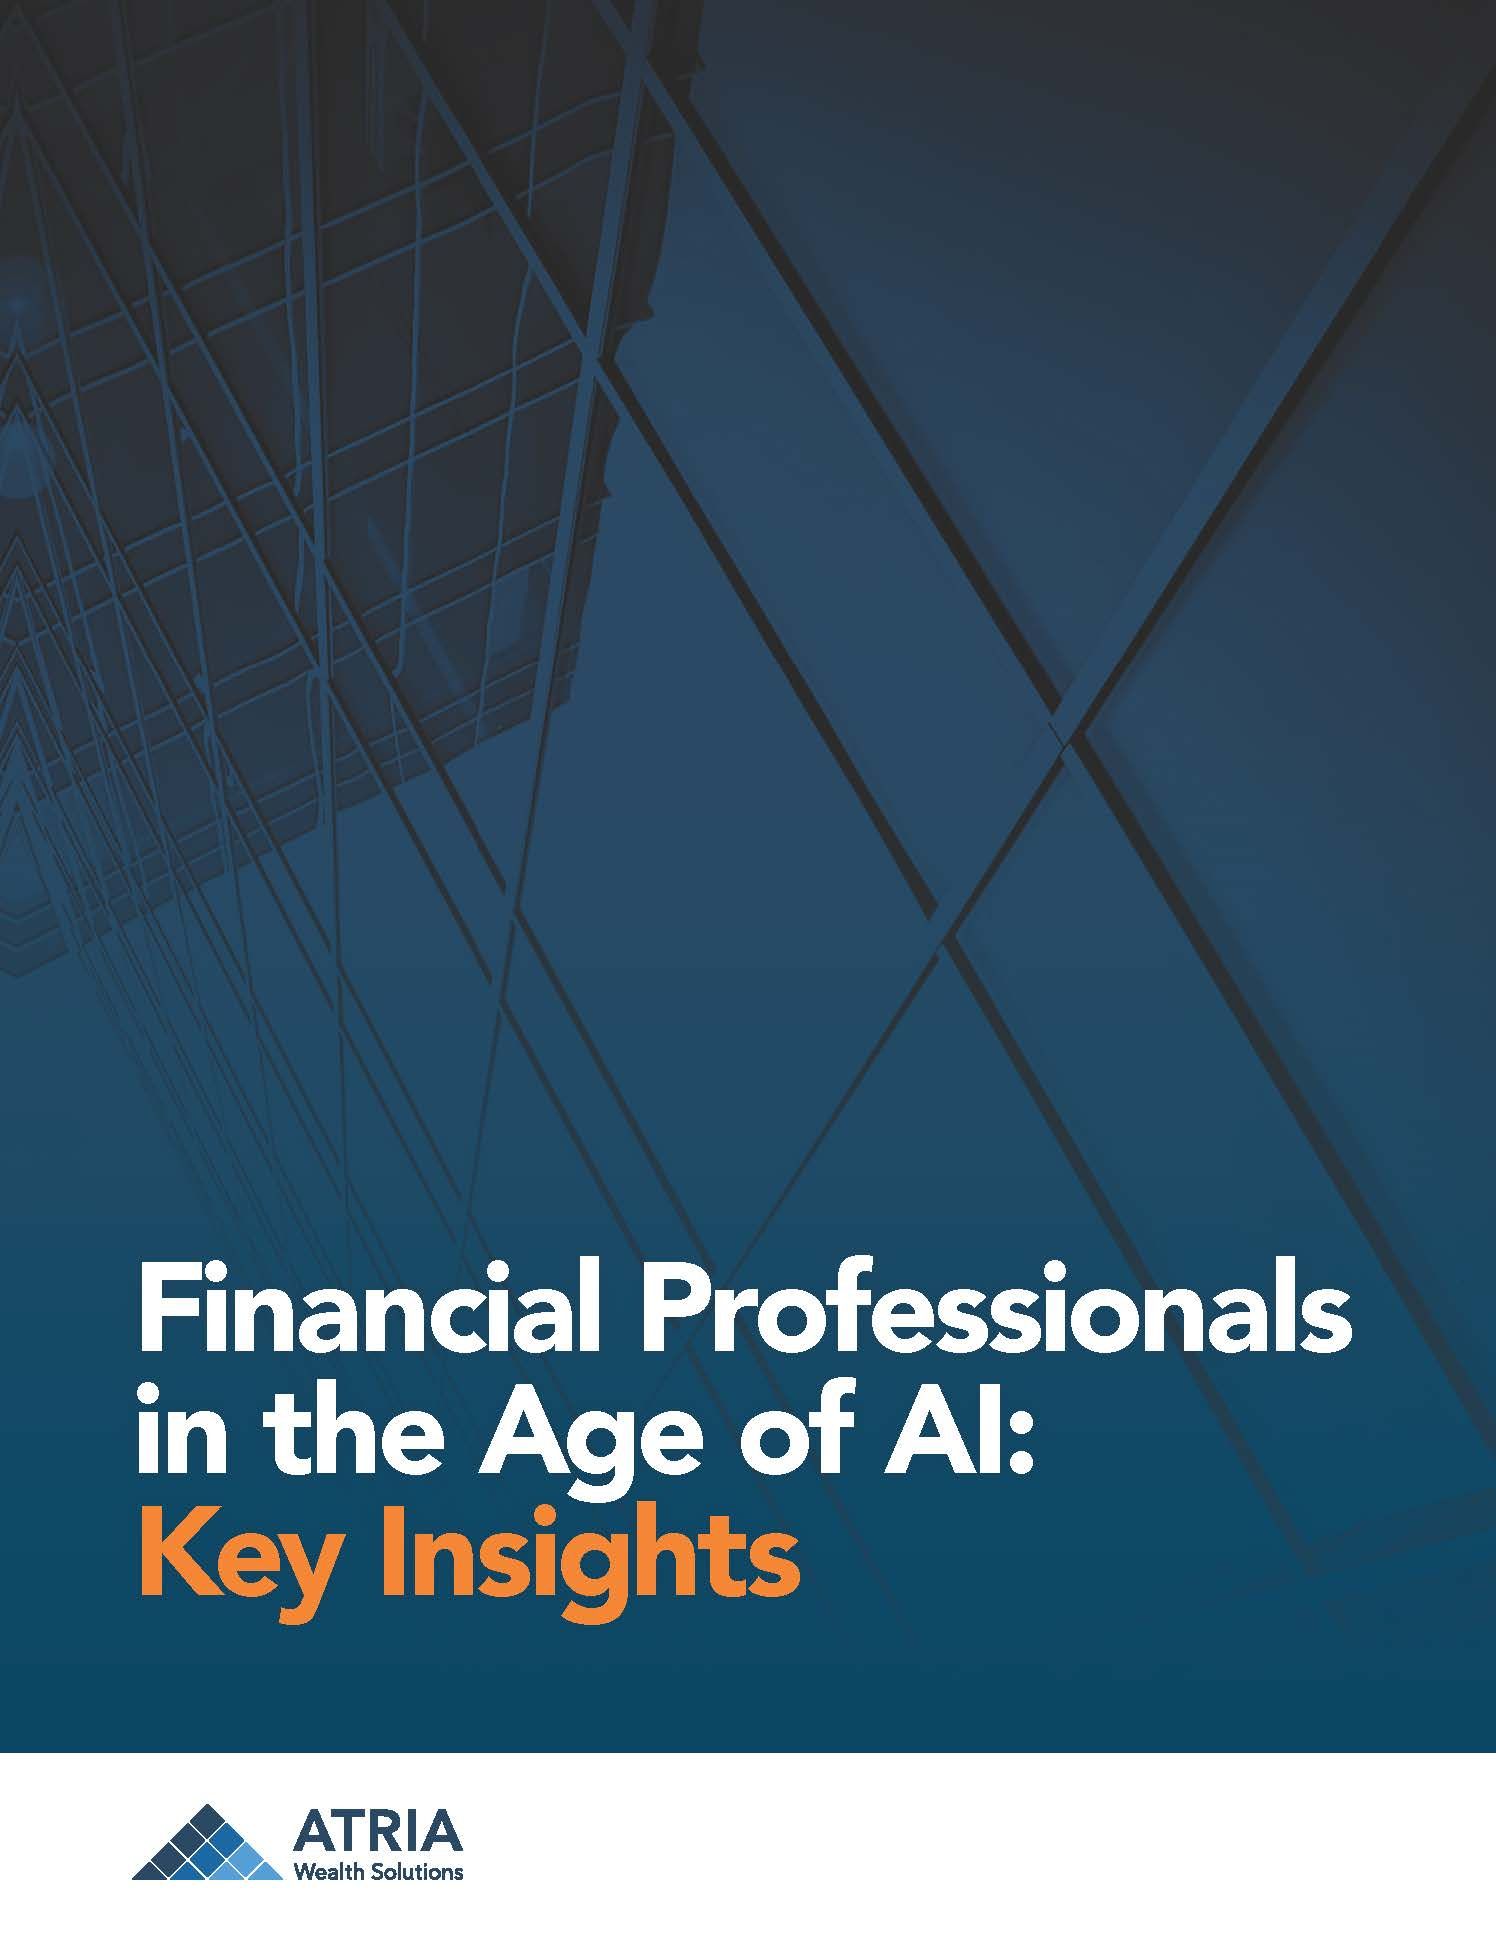 Financial Professionals in the Age of AI: Key Insights